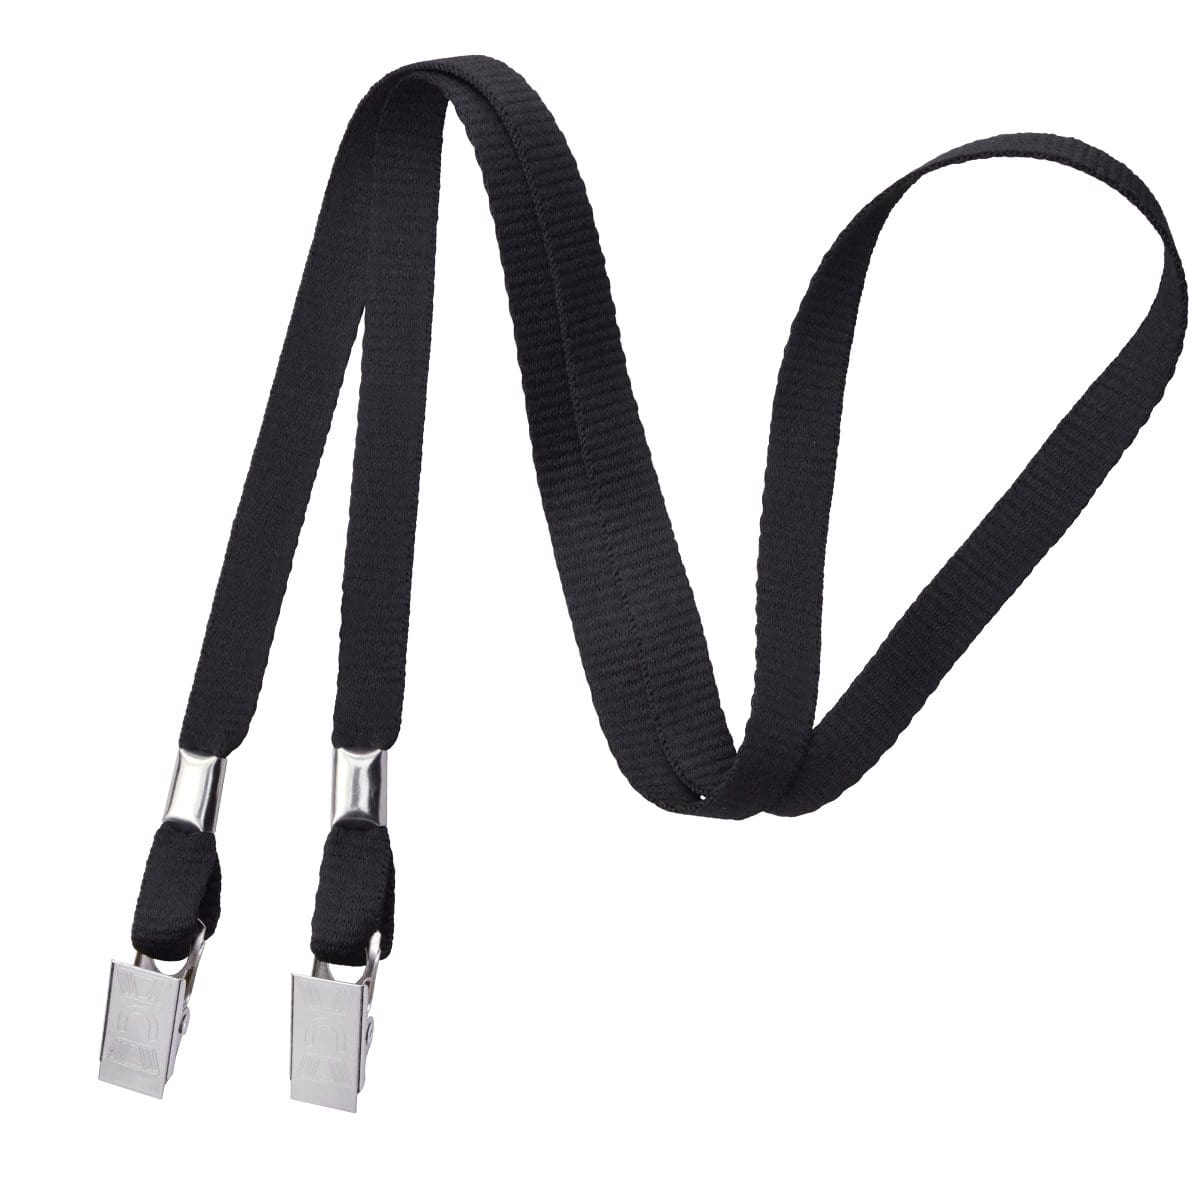 Double Clip Lanyard with 2 Bulldog Clips - Flat, Soft Material Neck Straps for Large Badge Holder Credentials (2140-530X)